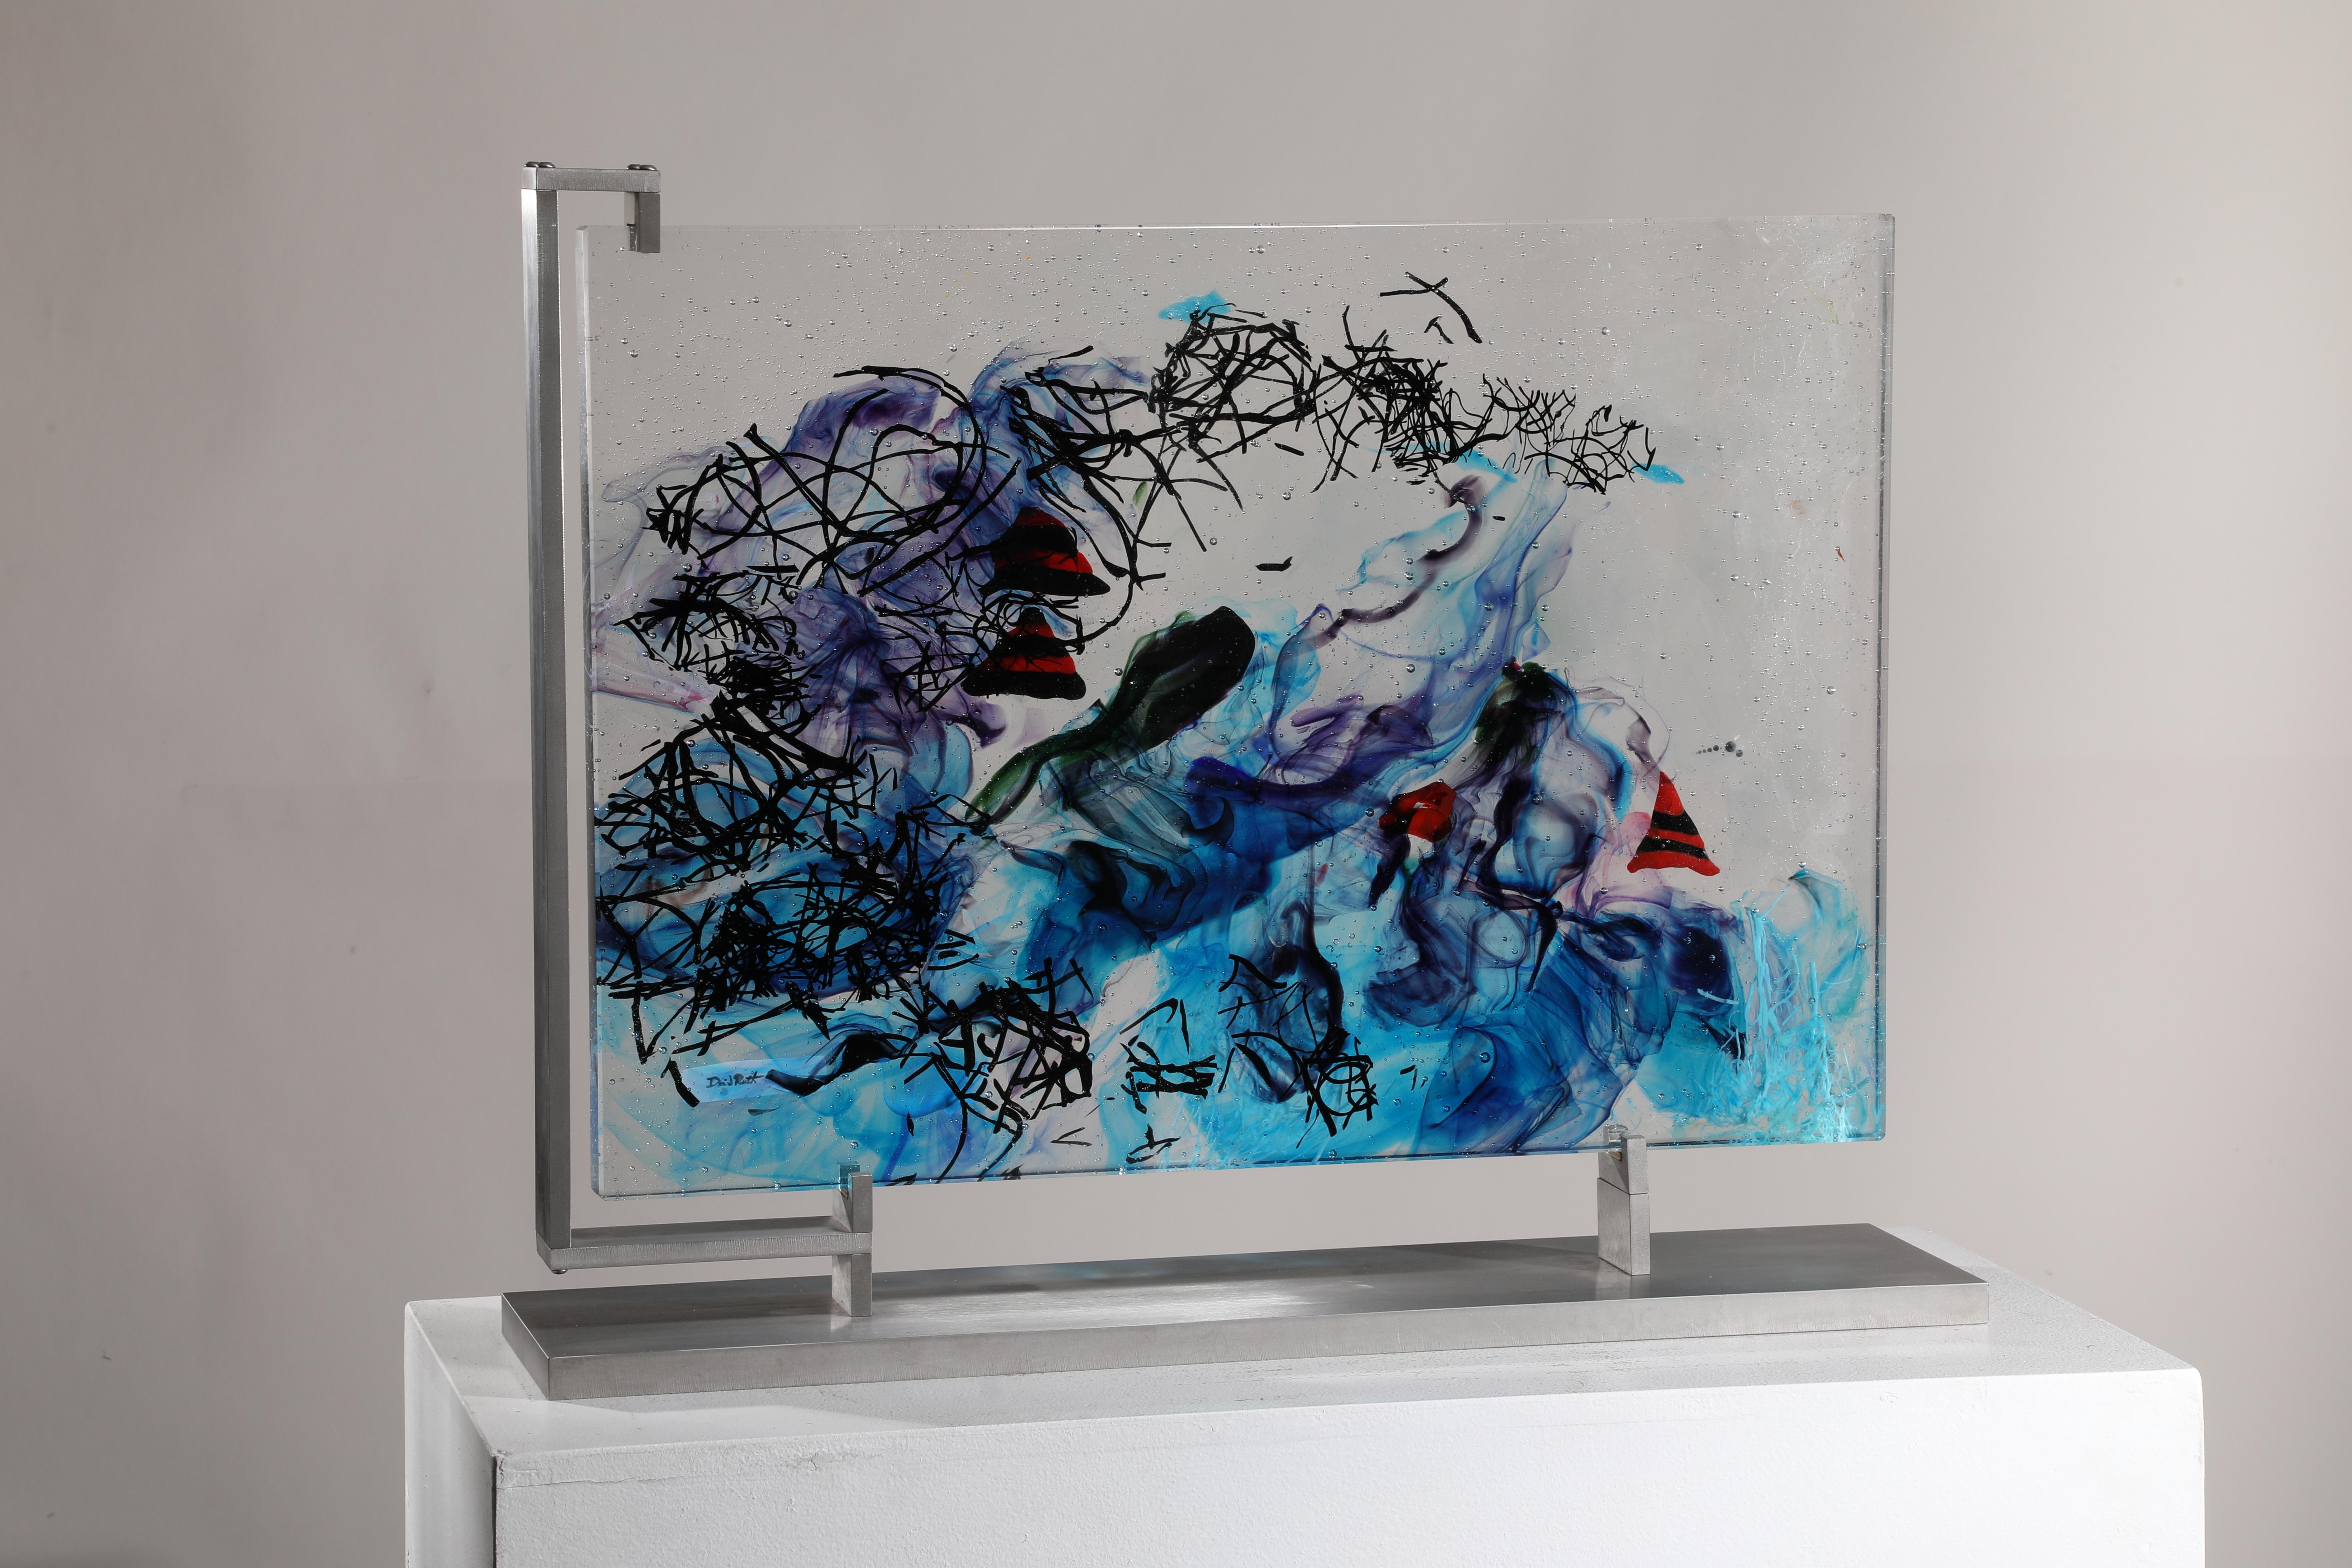 'Tikei' is a contemporary abstract cast glass sculpture by David Ruth from his Internal Space series. It features painterly brushstroke formations in glass called trails. Trails are created through rolling molten glass into various forms and shapes.